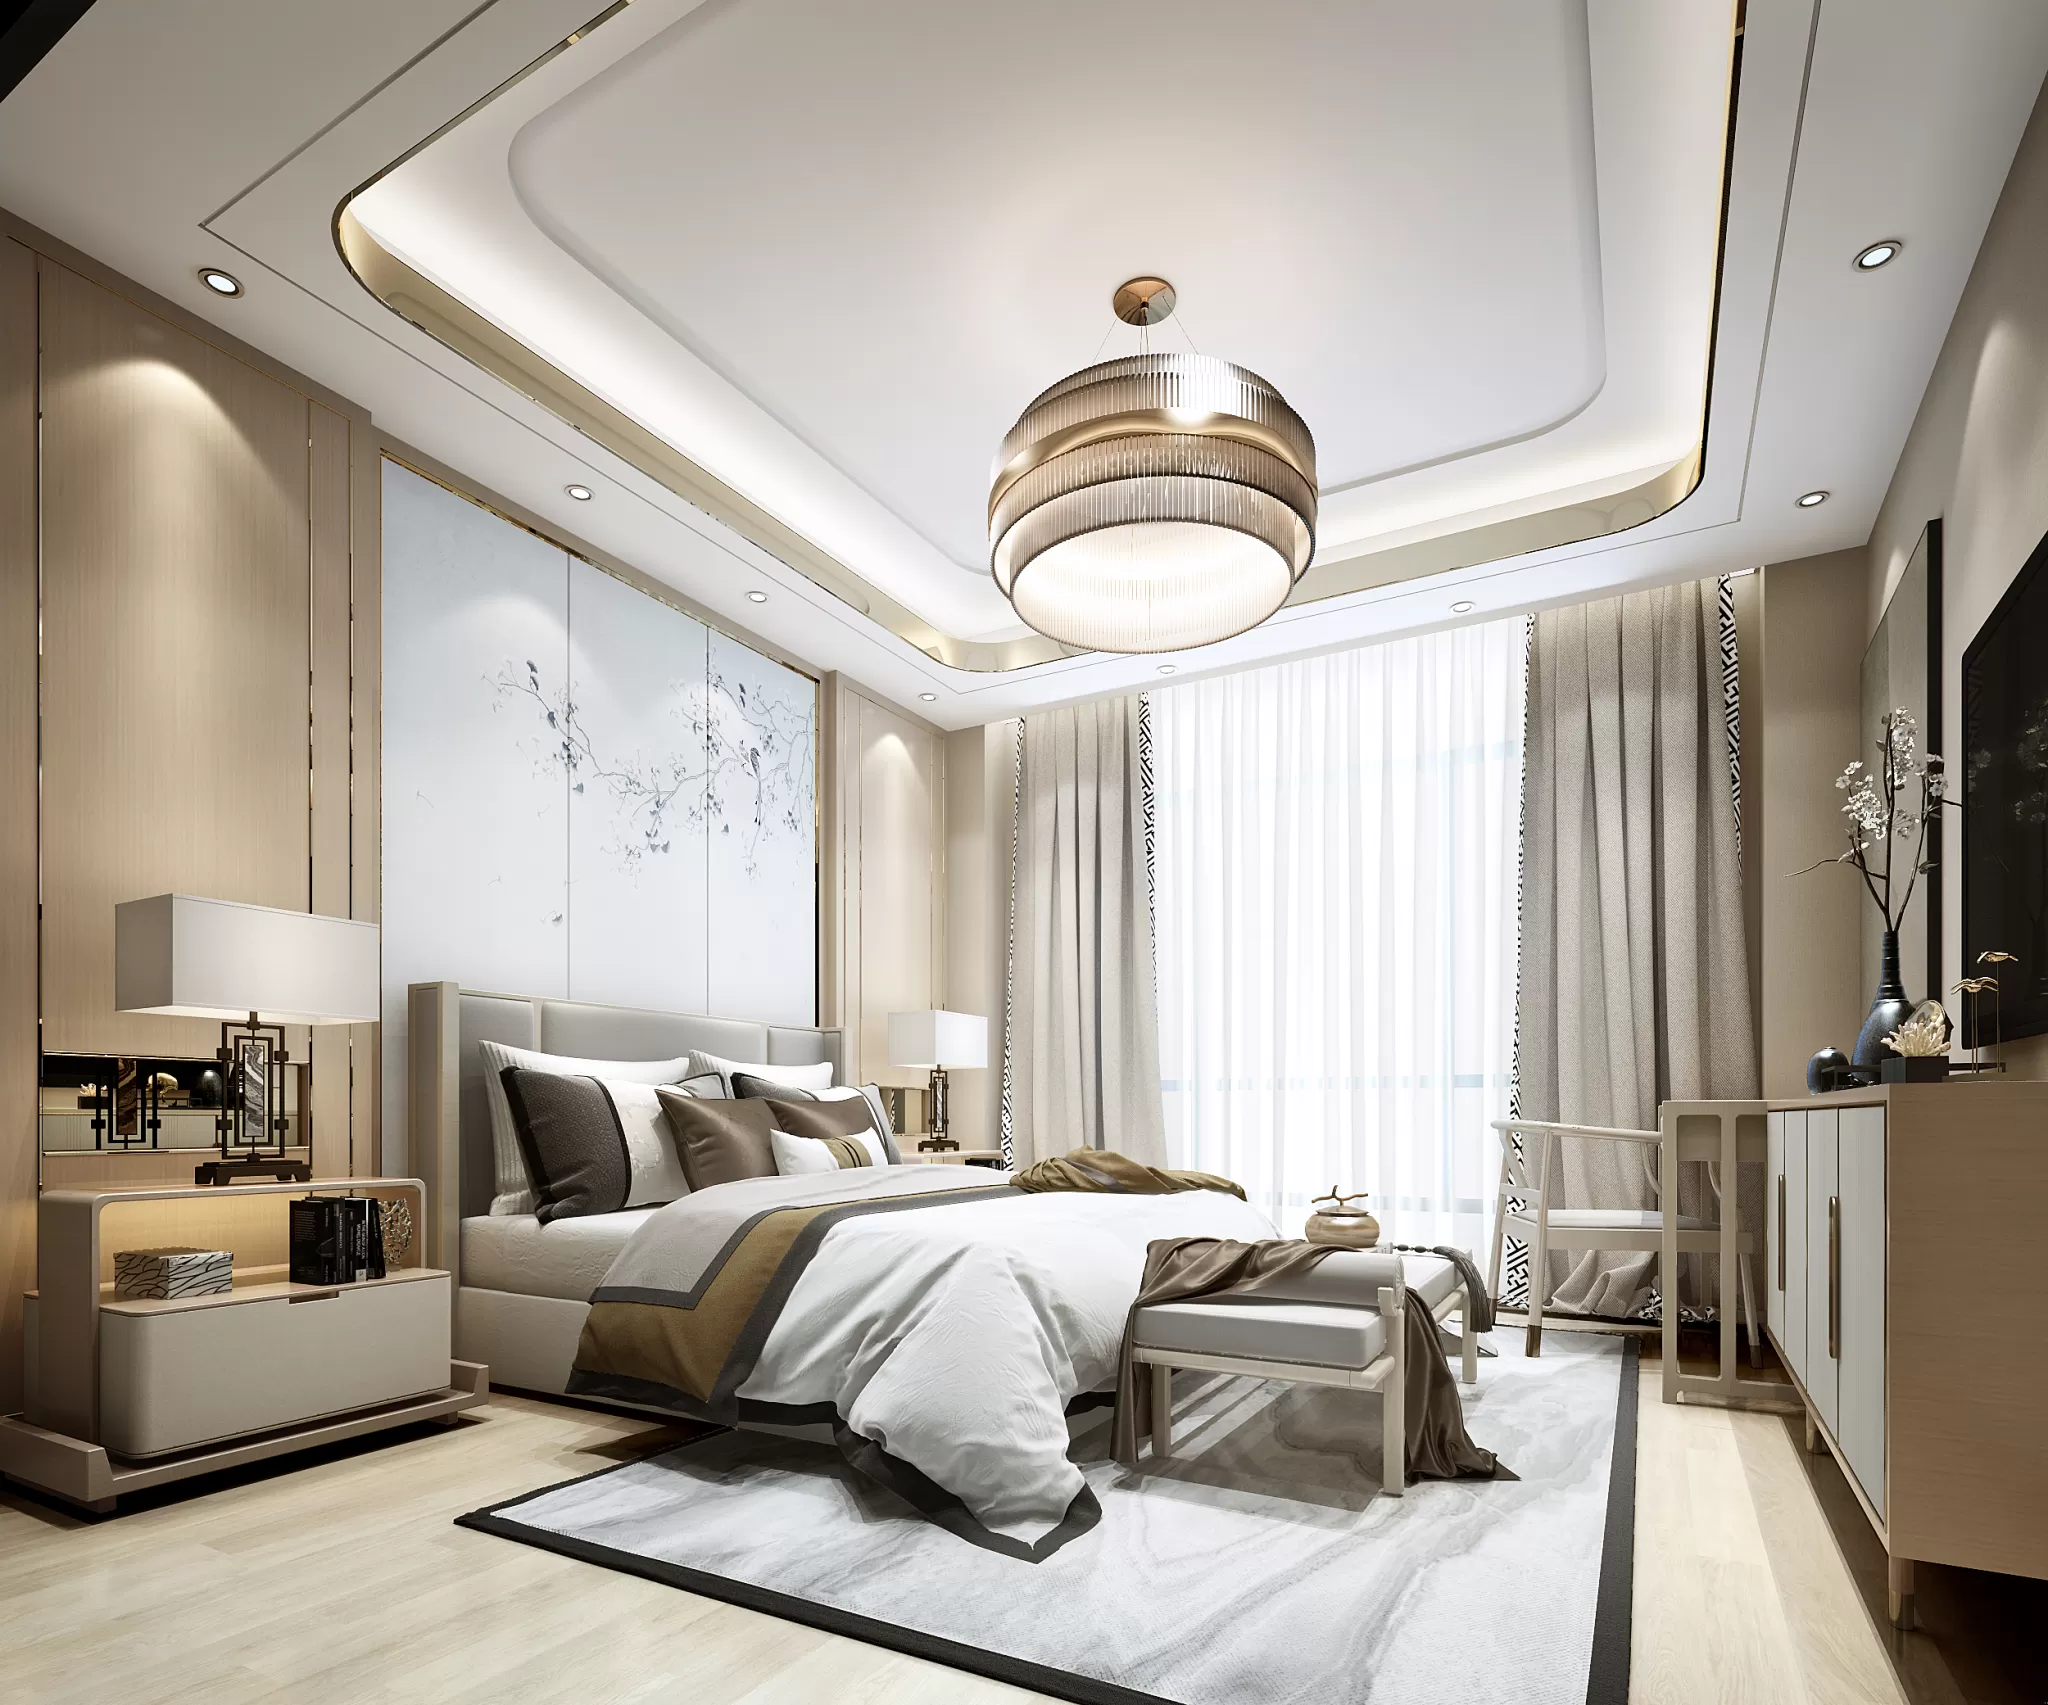 DESMOD INTERIOR 2021 (VRAY)/5. BEDROOM – 2. CHINESE STYLES – 153